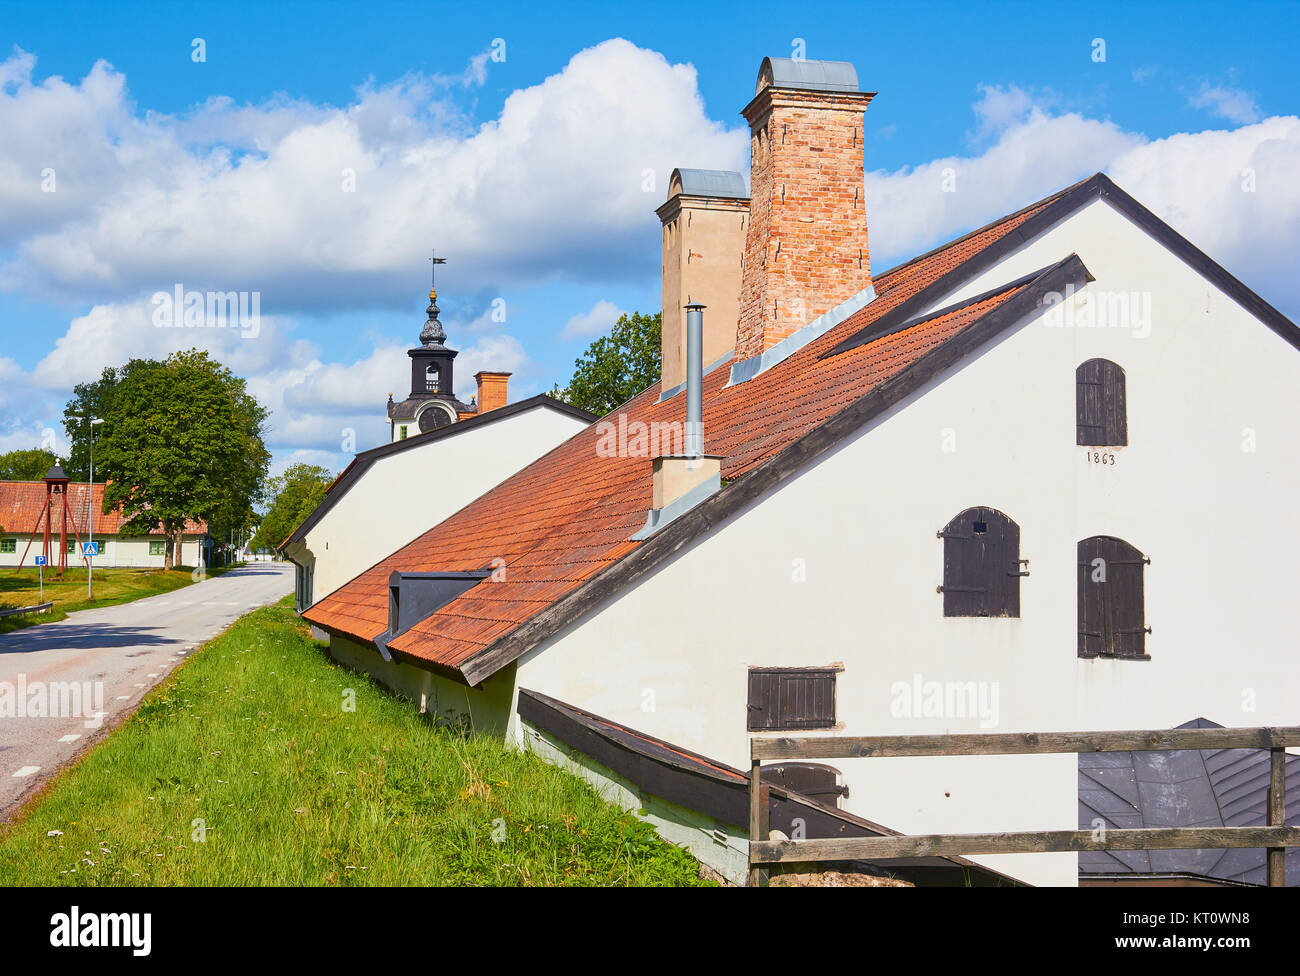 Harg a town in Uppland province, Sweden, scandinavia Stock Photo